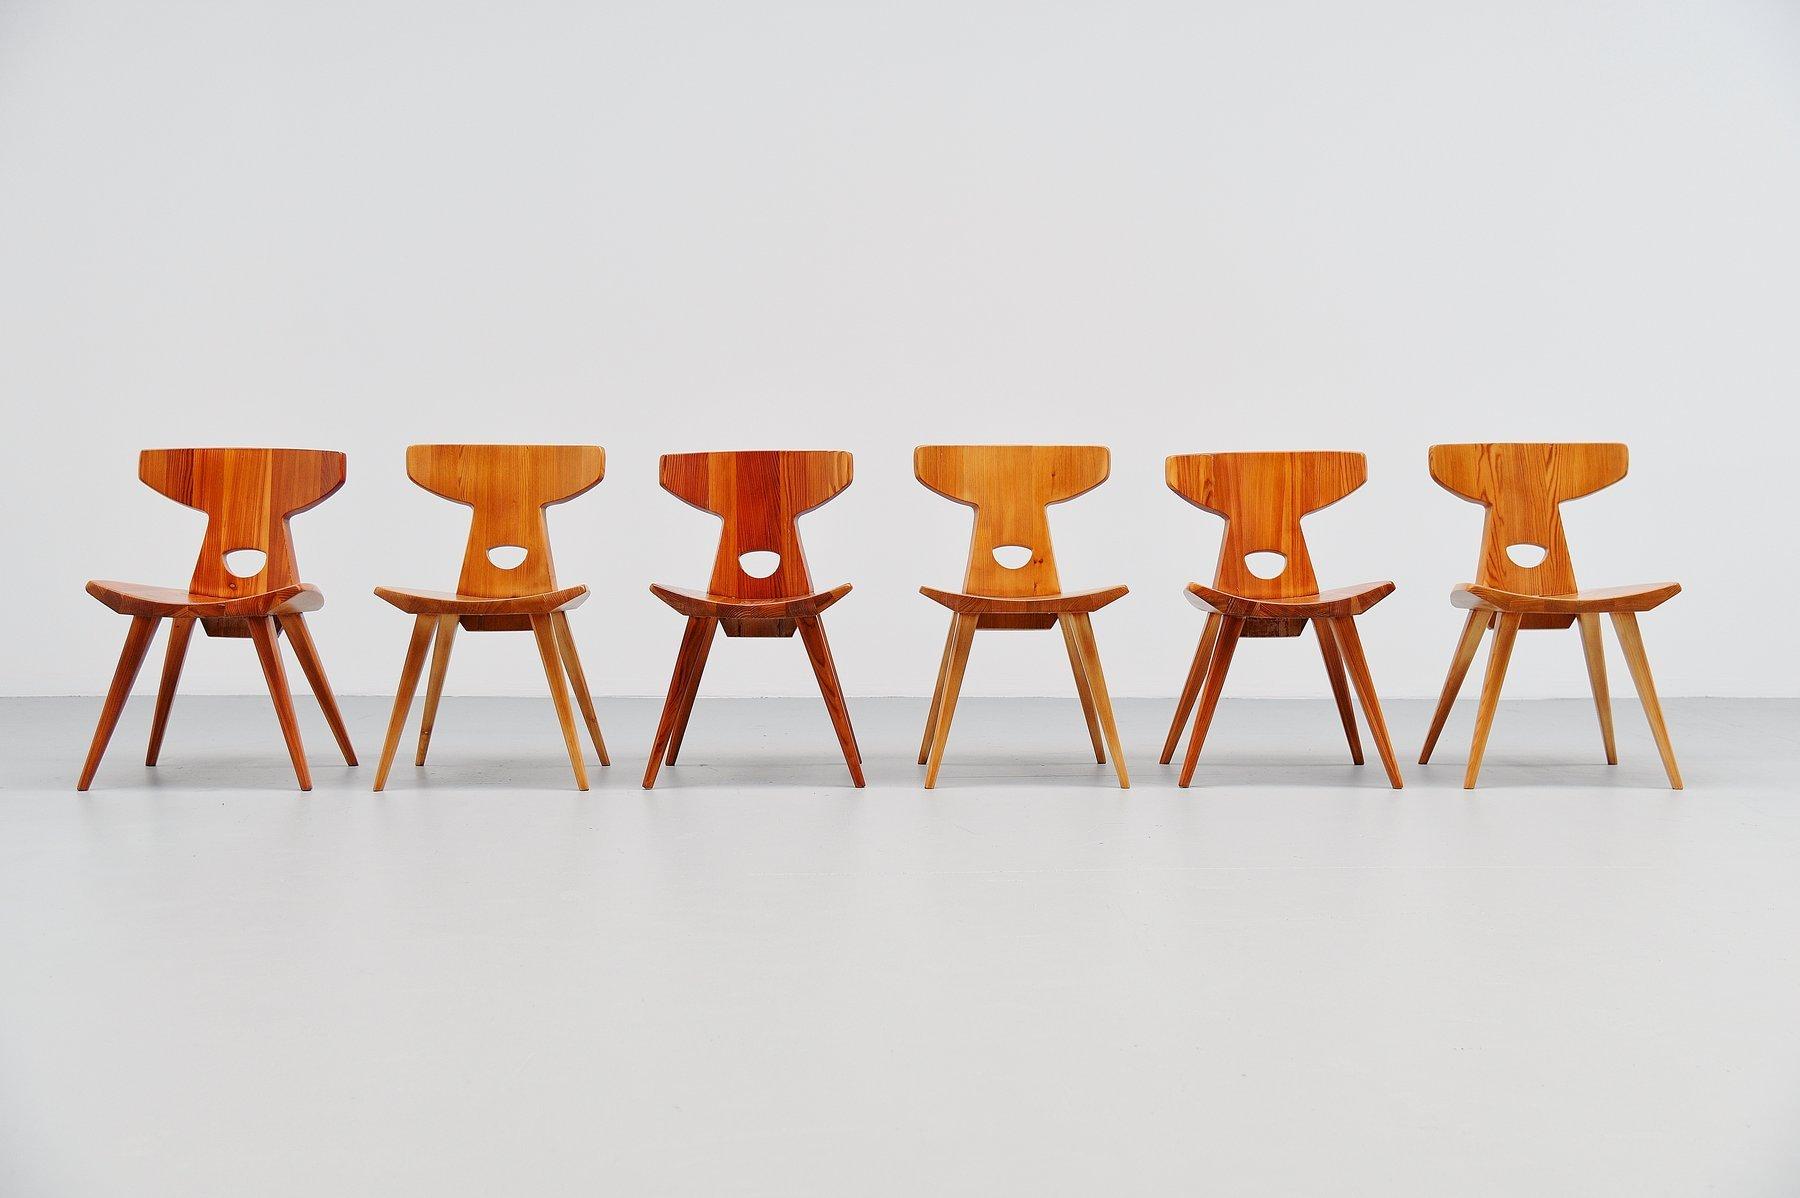 Fantastic set of 6 chairs designed by Jacob Kielland-Brandt for I. Christiansen, Denmark, 1960. The designer won the Cabinetmaker Guild price in Denmark, 1960. Super handcrafted chairs in solid pine wood. Amazing shaped and superbly finished. Have a